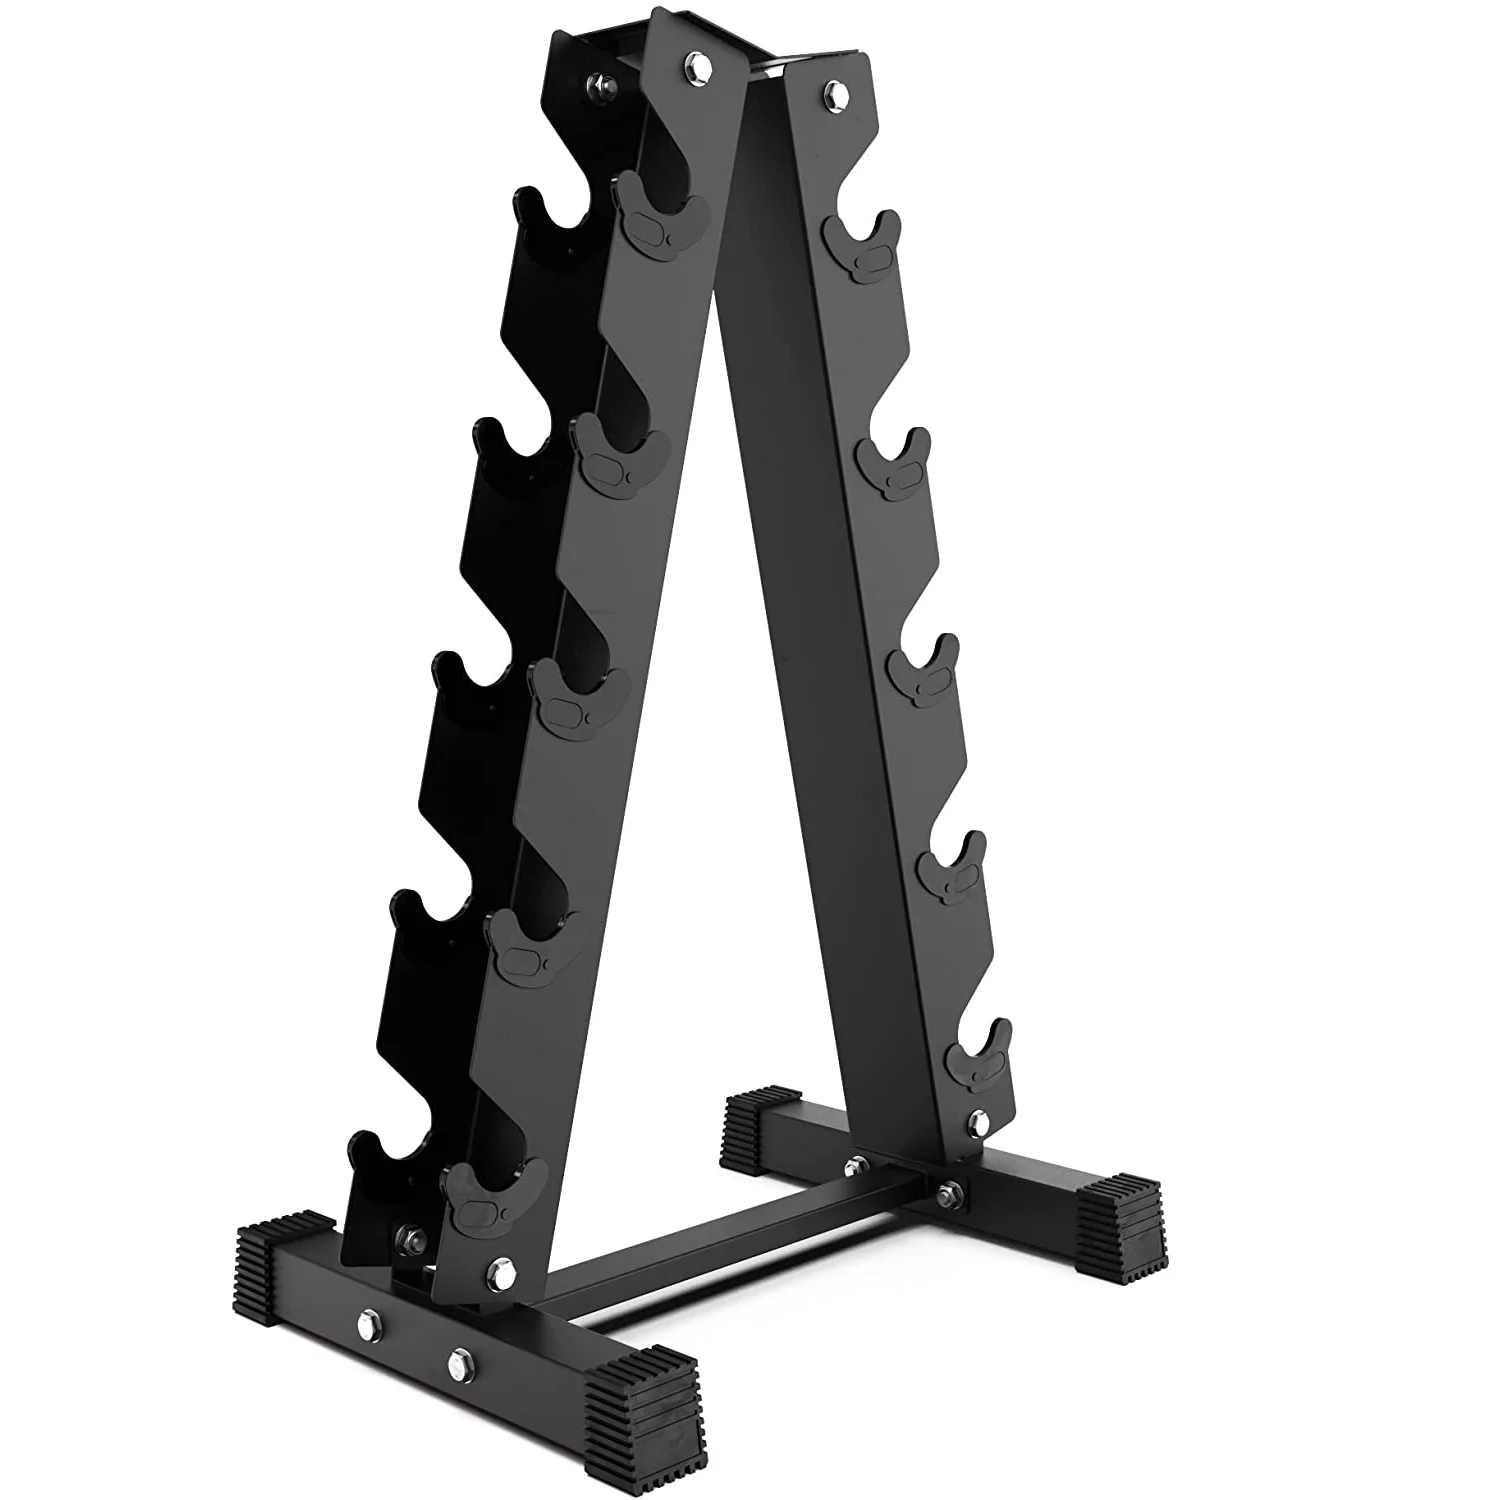 A-Frame Dumbbell Rack Stand Only 500 Pounds Weight Capacity Weight Rack for Dumbbells 5 Tier 